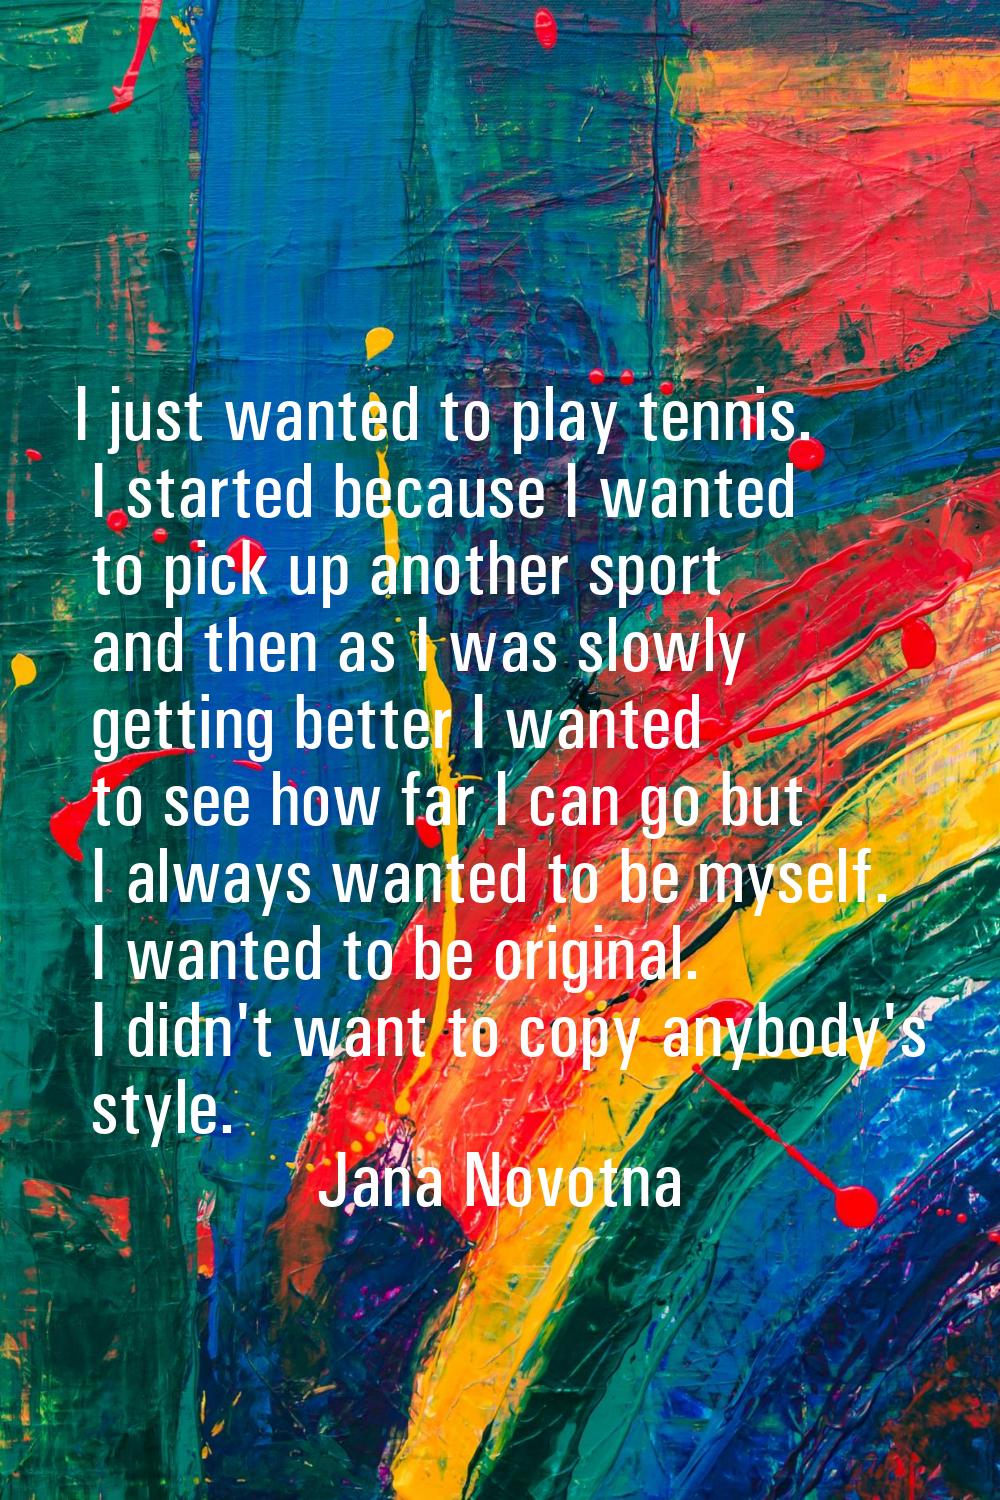 I just wanted to play tennis. I started because I wanted to pick up another sport and then as I was